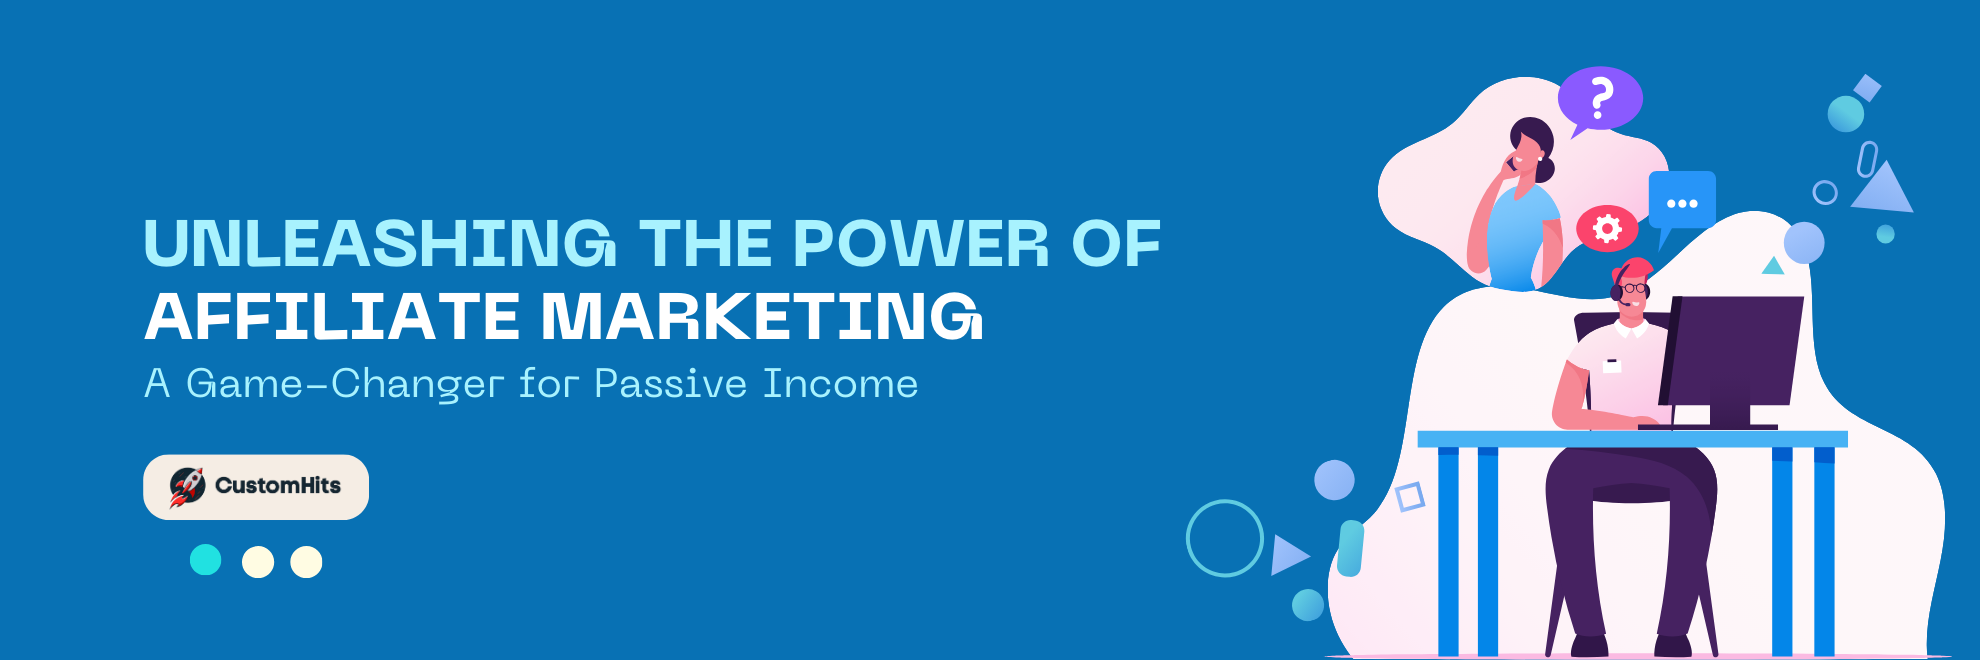 Unleashing the Power of Affiliate Marketing: A Game-Changer for Passive Income